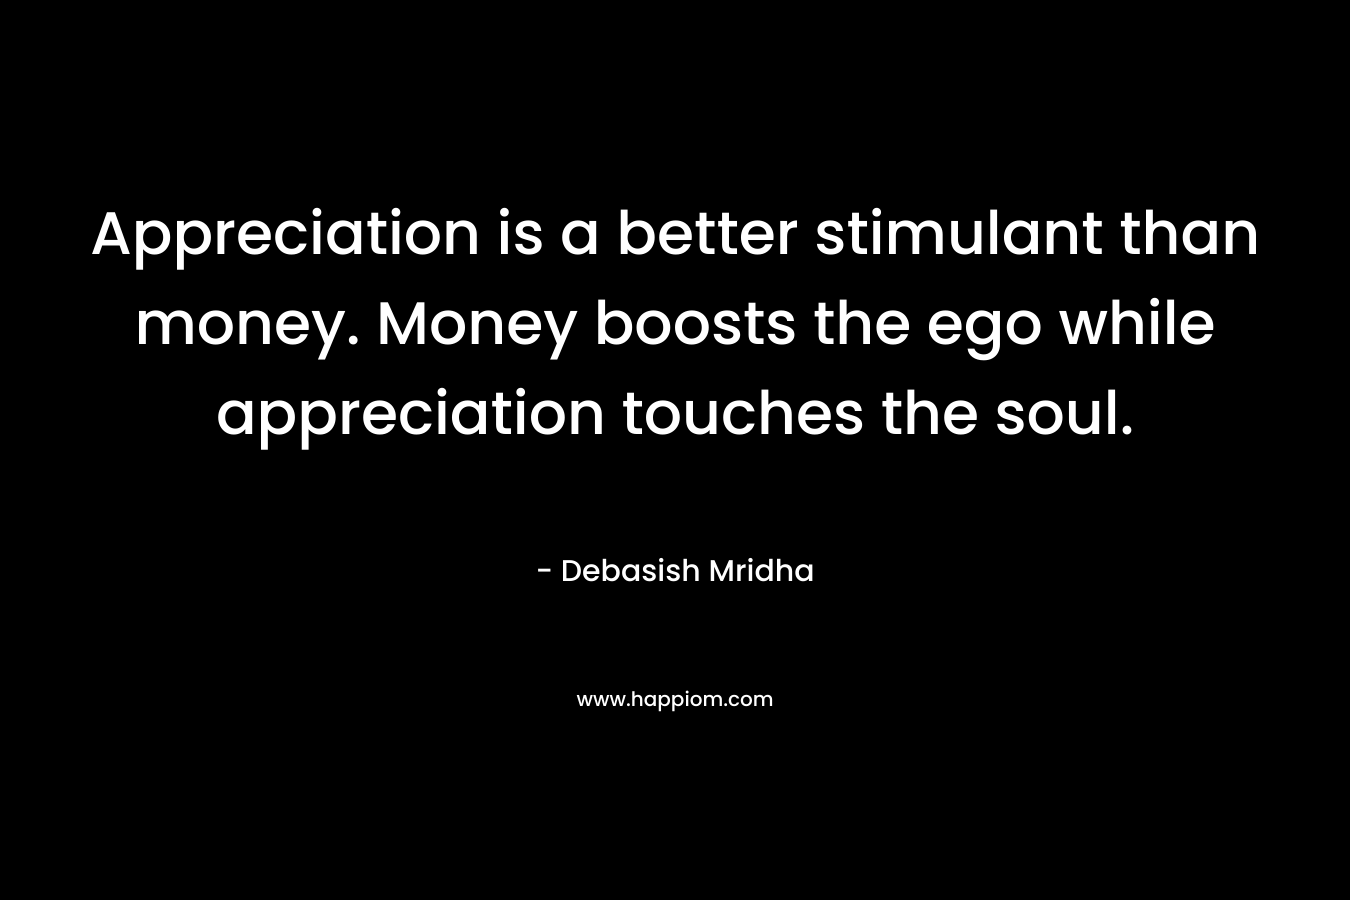 Appreciation is a better stimulant than money. Money boosts the ego while appreciation touches the soul.